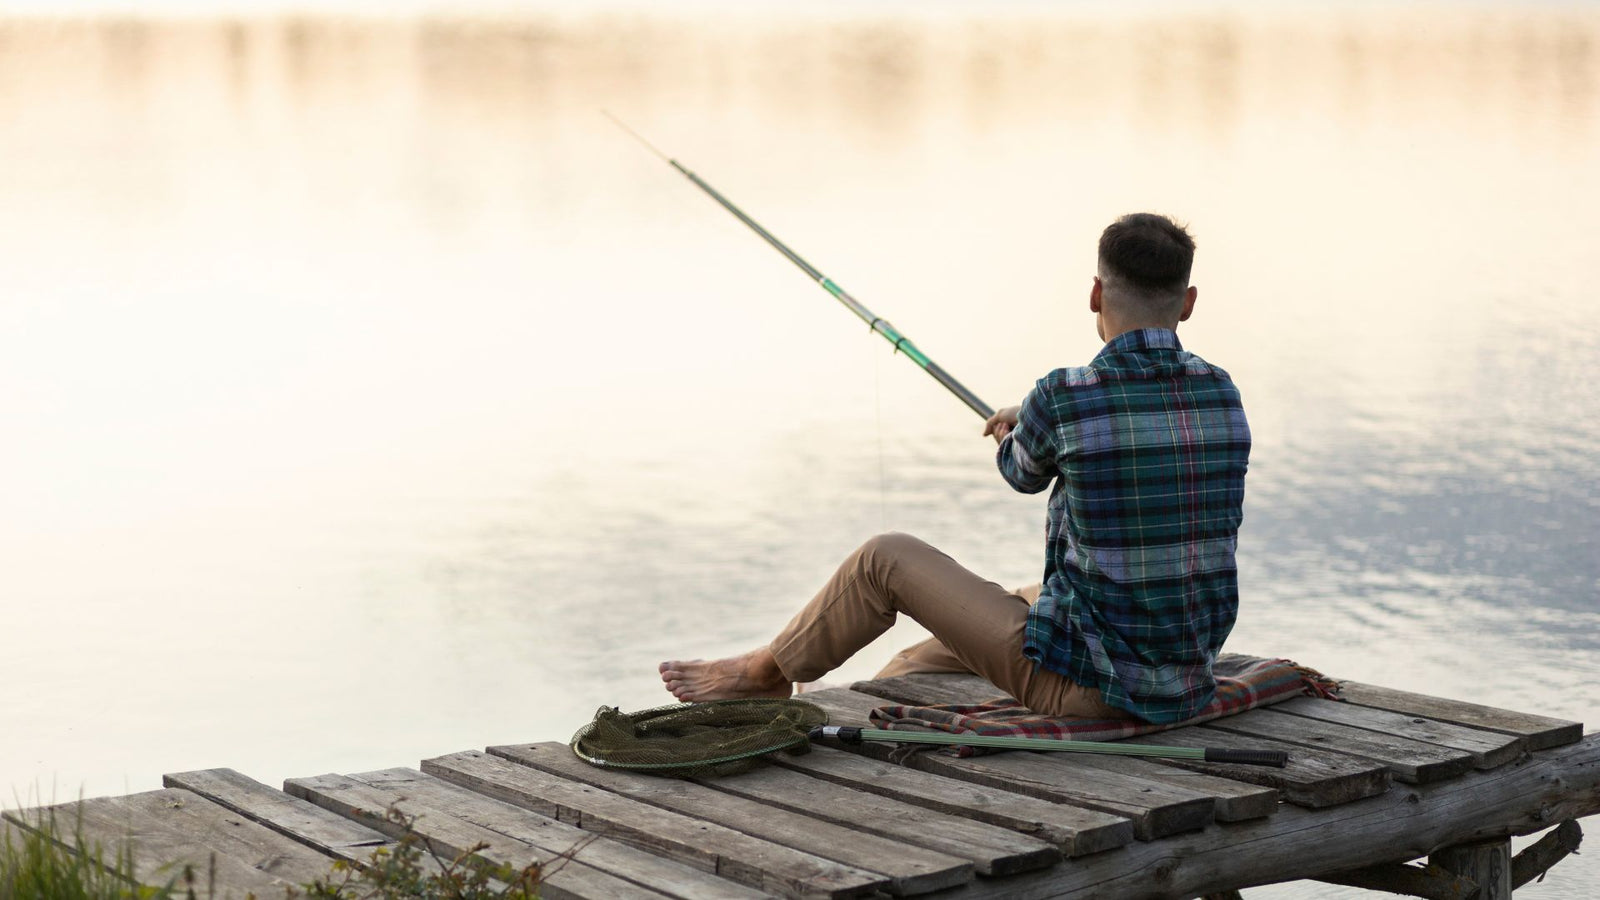  Man fishing by the river. He is sitting on a small dock and holding a fishing rod with his hand, while looking at the water. The background features trees and a calm river.